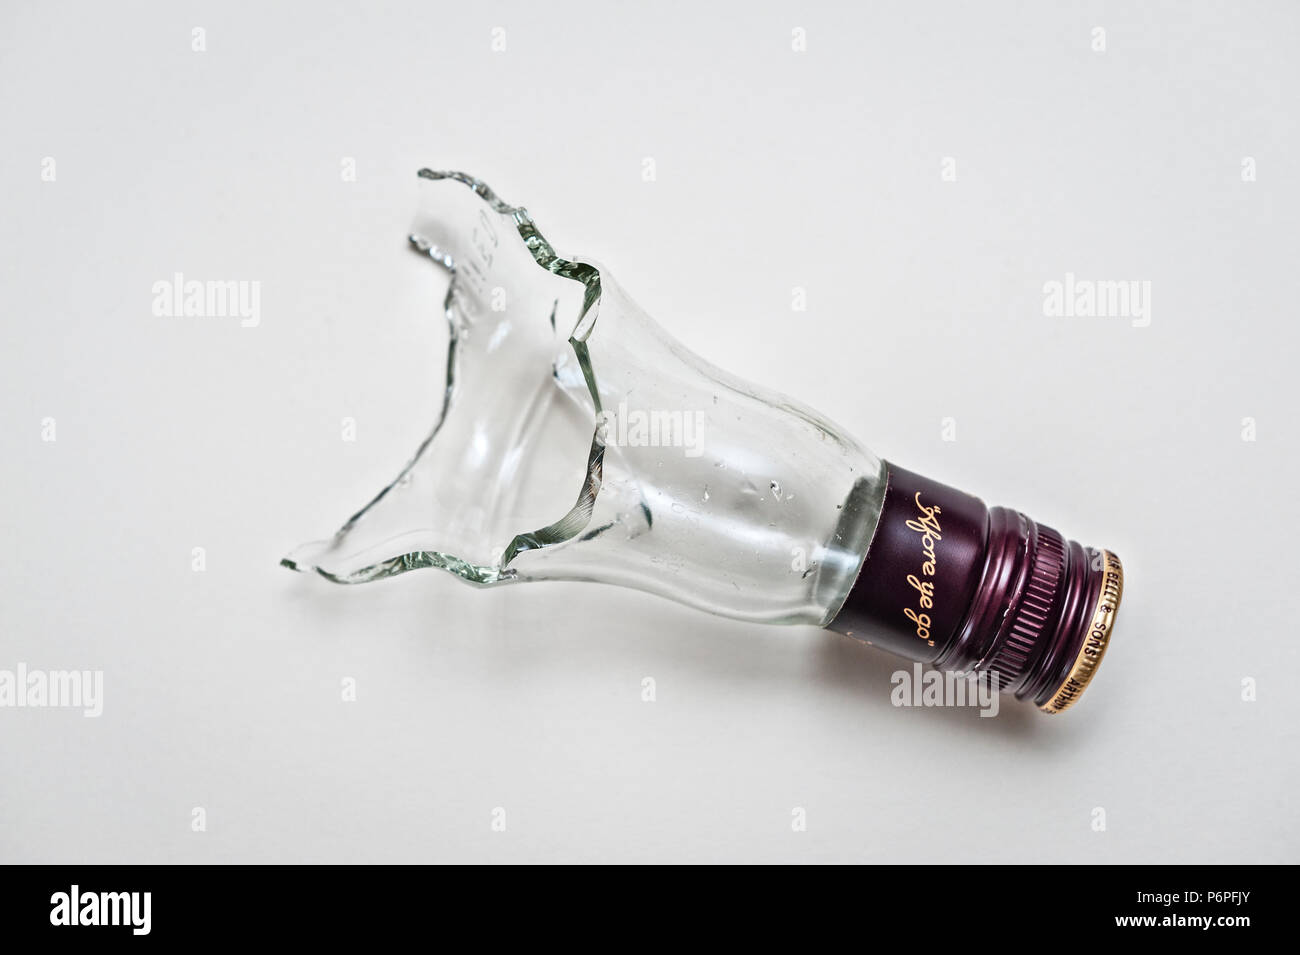 The neck of a broken whisky bottle makes a vicious weapon in hand to hand fighting, such as a bar brawl Stock Photo